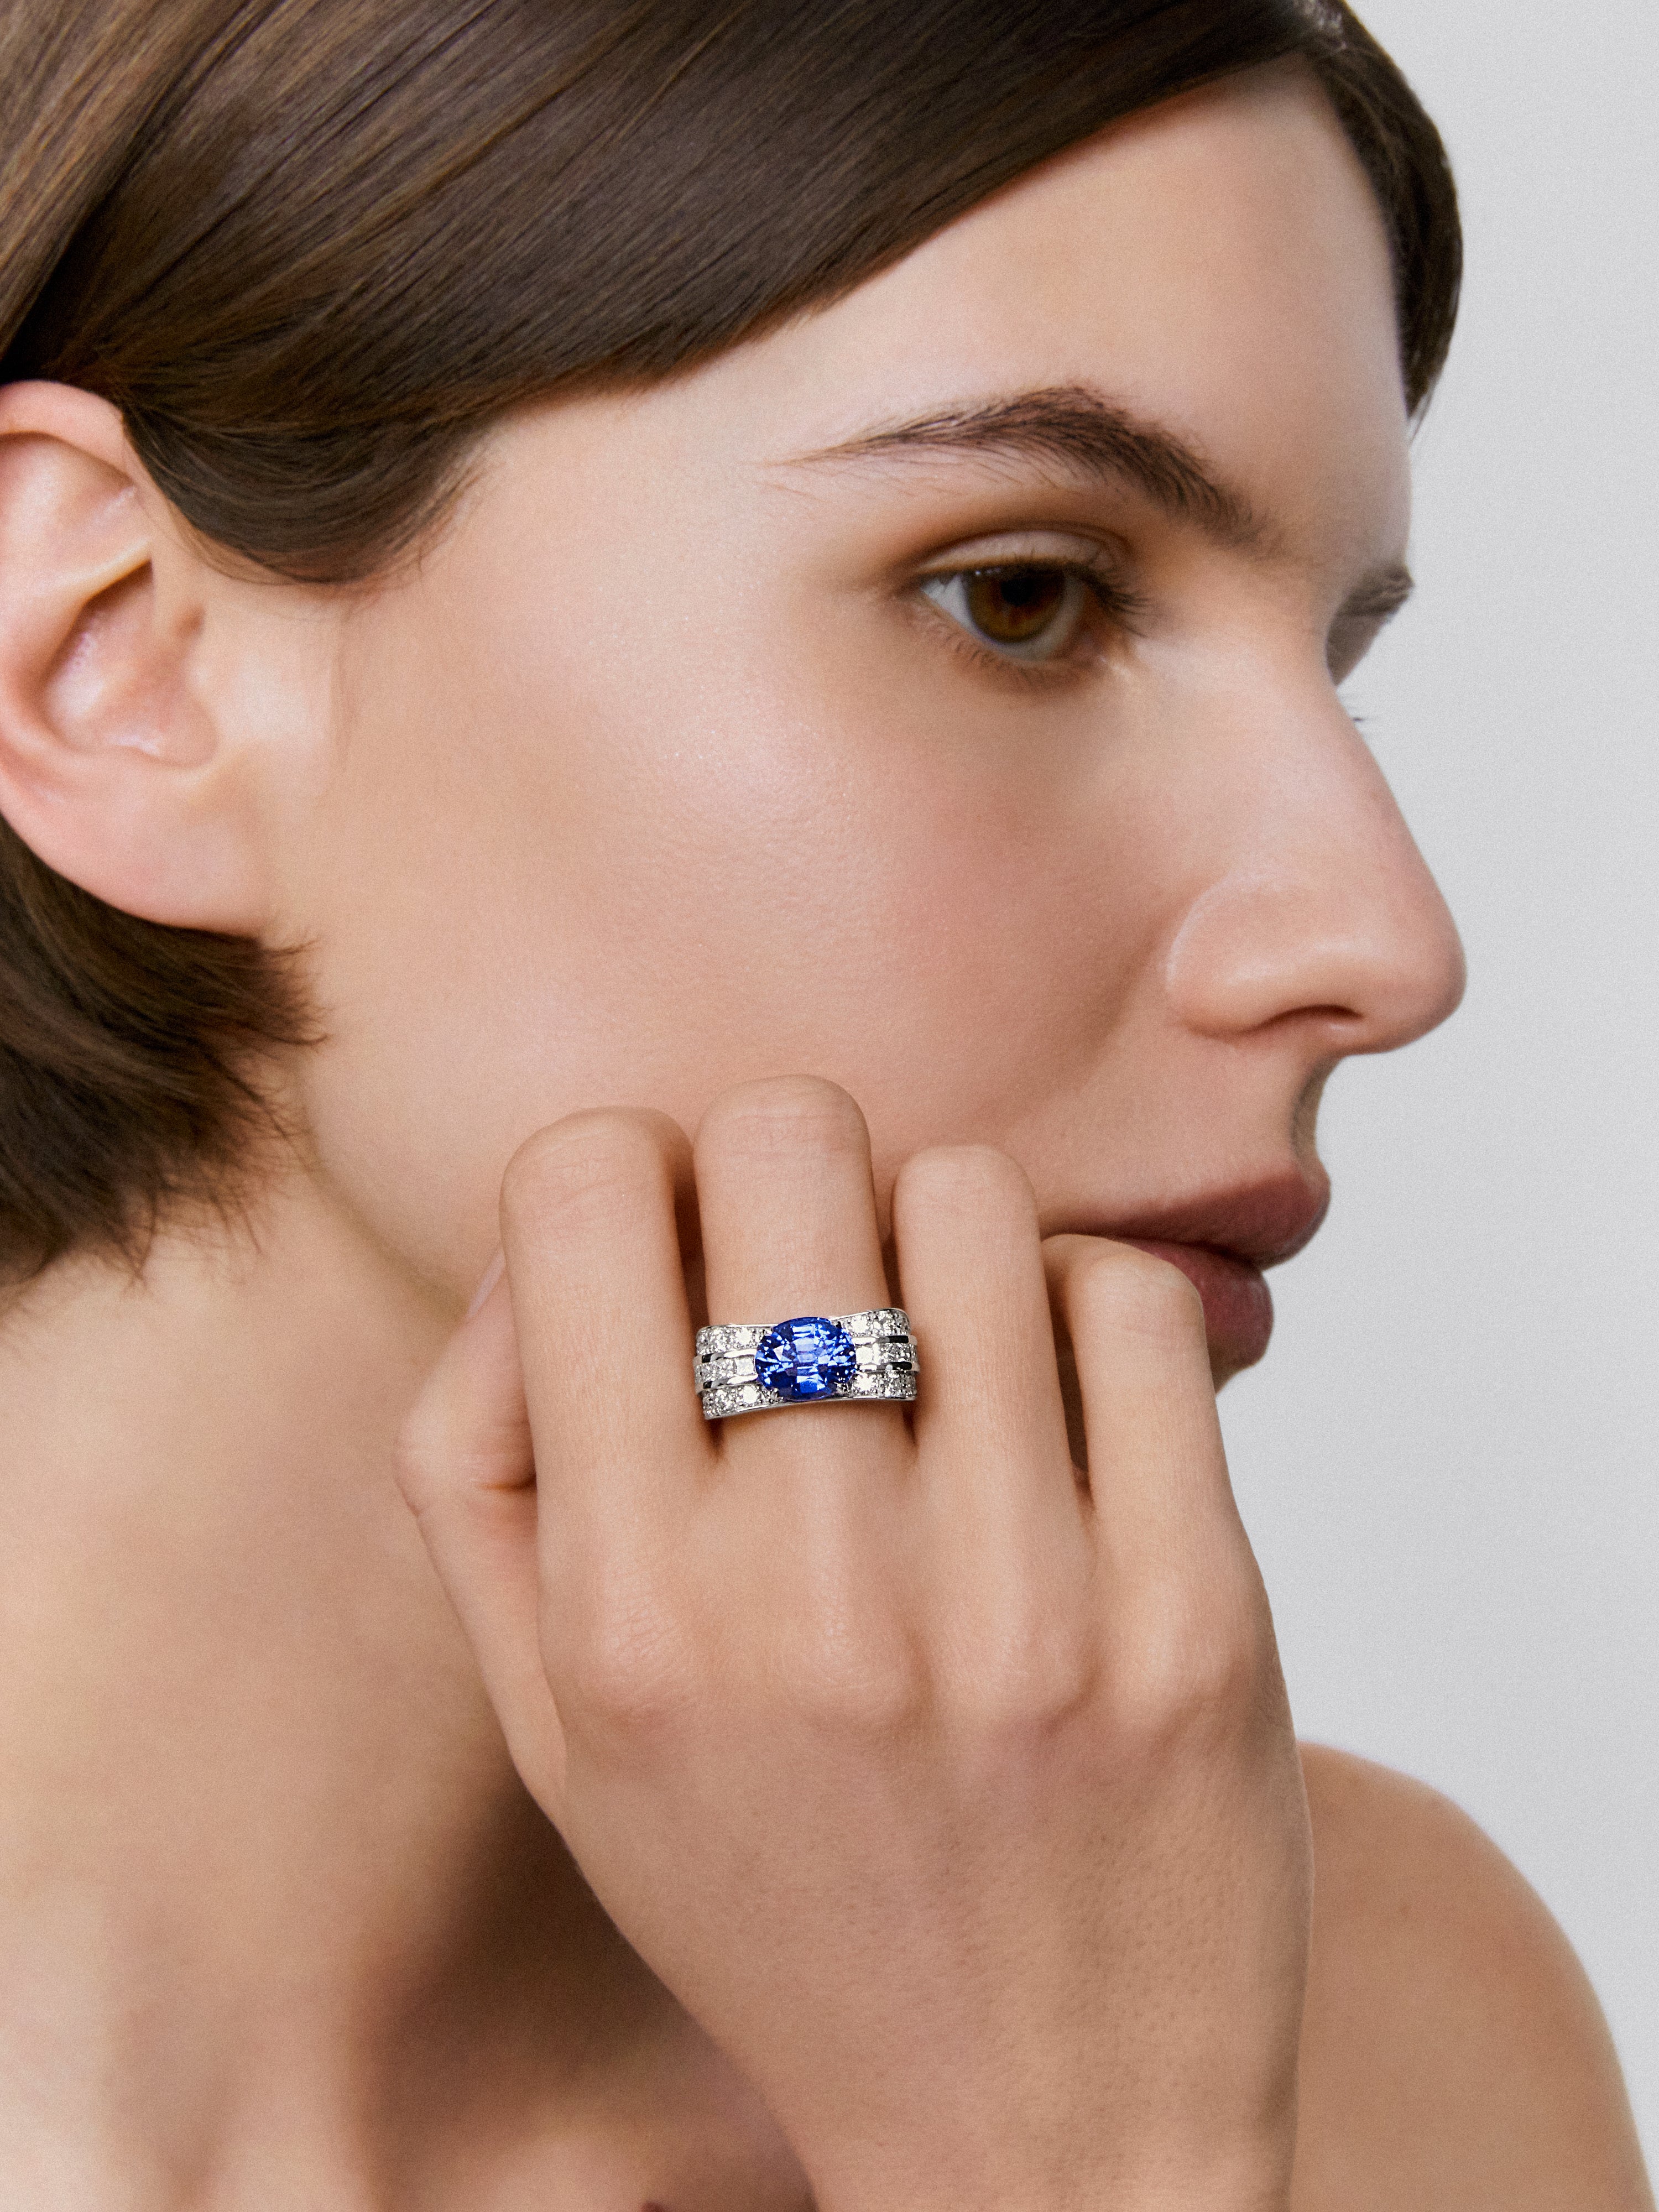 18K white gold ring with oval-cut blue sapphire 3.69 cts and 52 princess-cut and brilliant-cut diamonds with a total of 1.71 cts